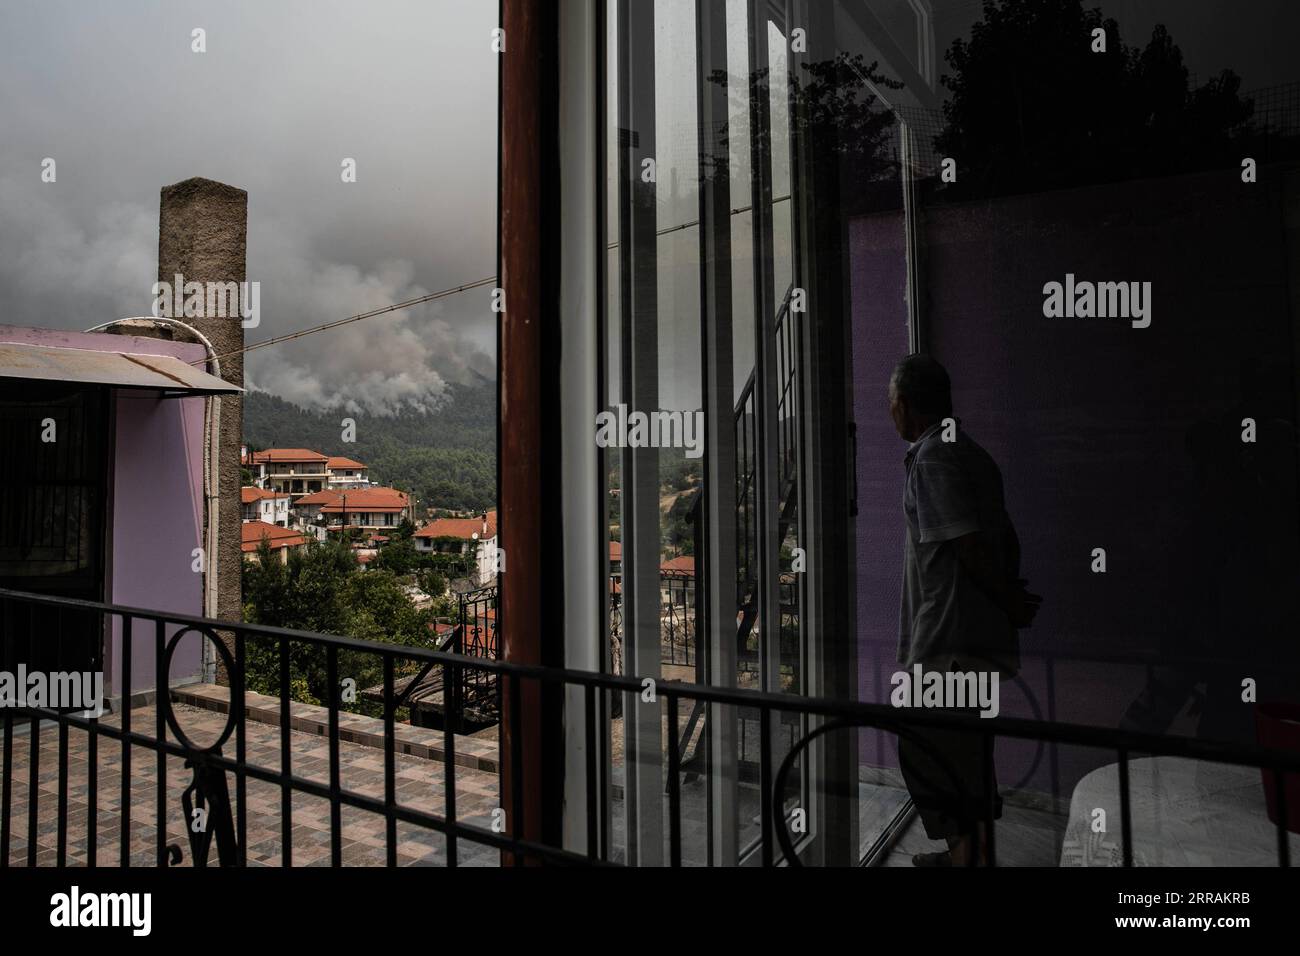 210806 -- EVIA, Aug. 6, 2021 -- A man watches clouding smog from a wildfire at his house in the north of Evia island, Greece, on Aug. 5, 2021. Greek Prime Minister Kyriakos Mitsotakis said on Thursday evening that Greece is facing an extremely critical situation with multiple forest fires at the same time, while saving human lives is the government s top priority. Wildfires in the north of Athens leapt back to life on Thursday as Greece also faces flare-ups on the island of Evia, in Ancient Olympia in the northwestern Peloponnese and in other parts of the country. TO GO WITH Greek PM says savi Stock Photo